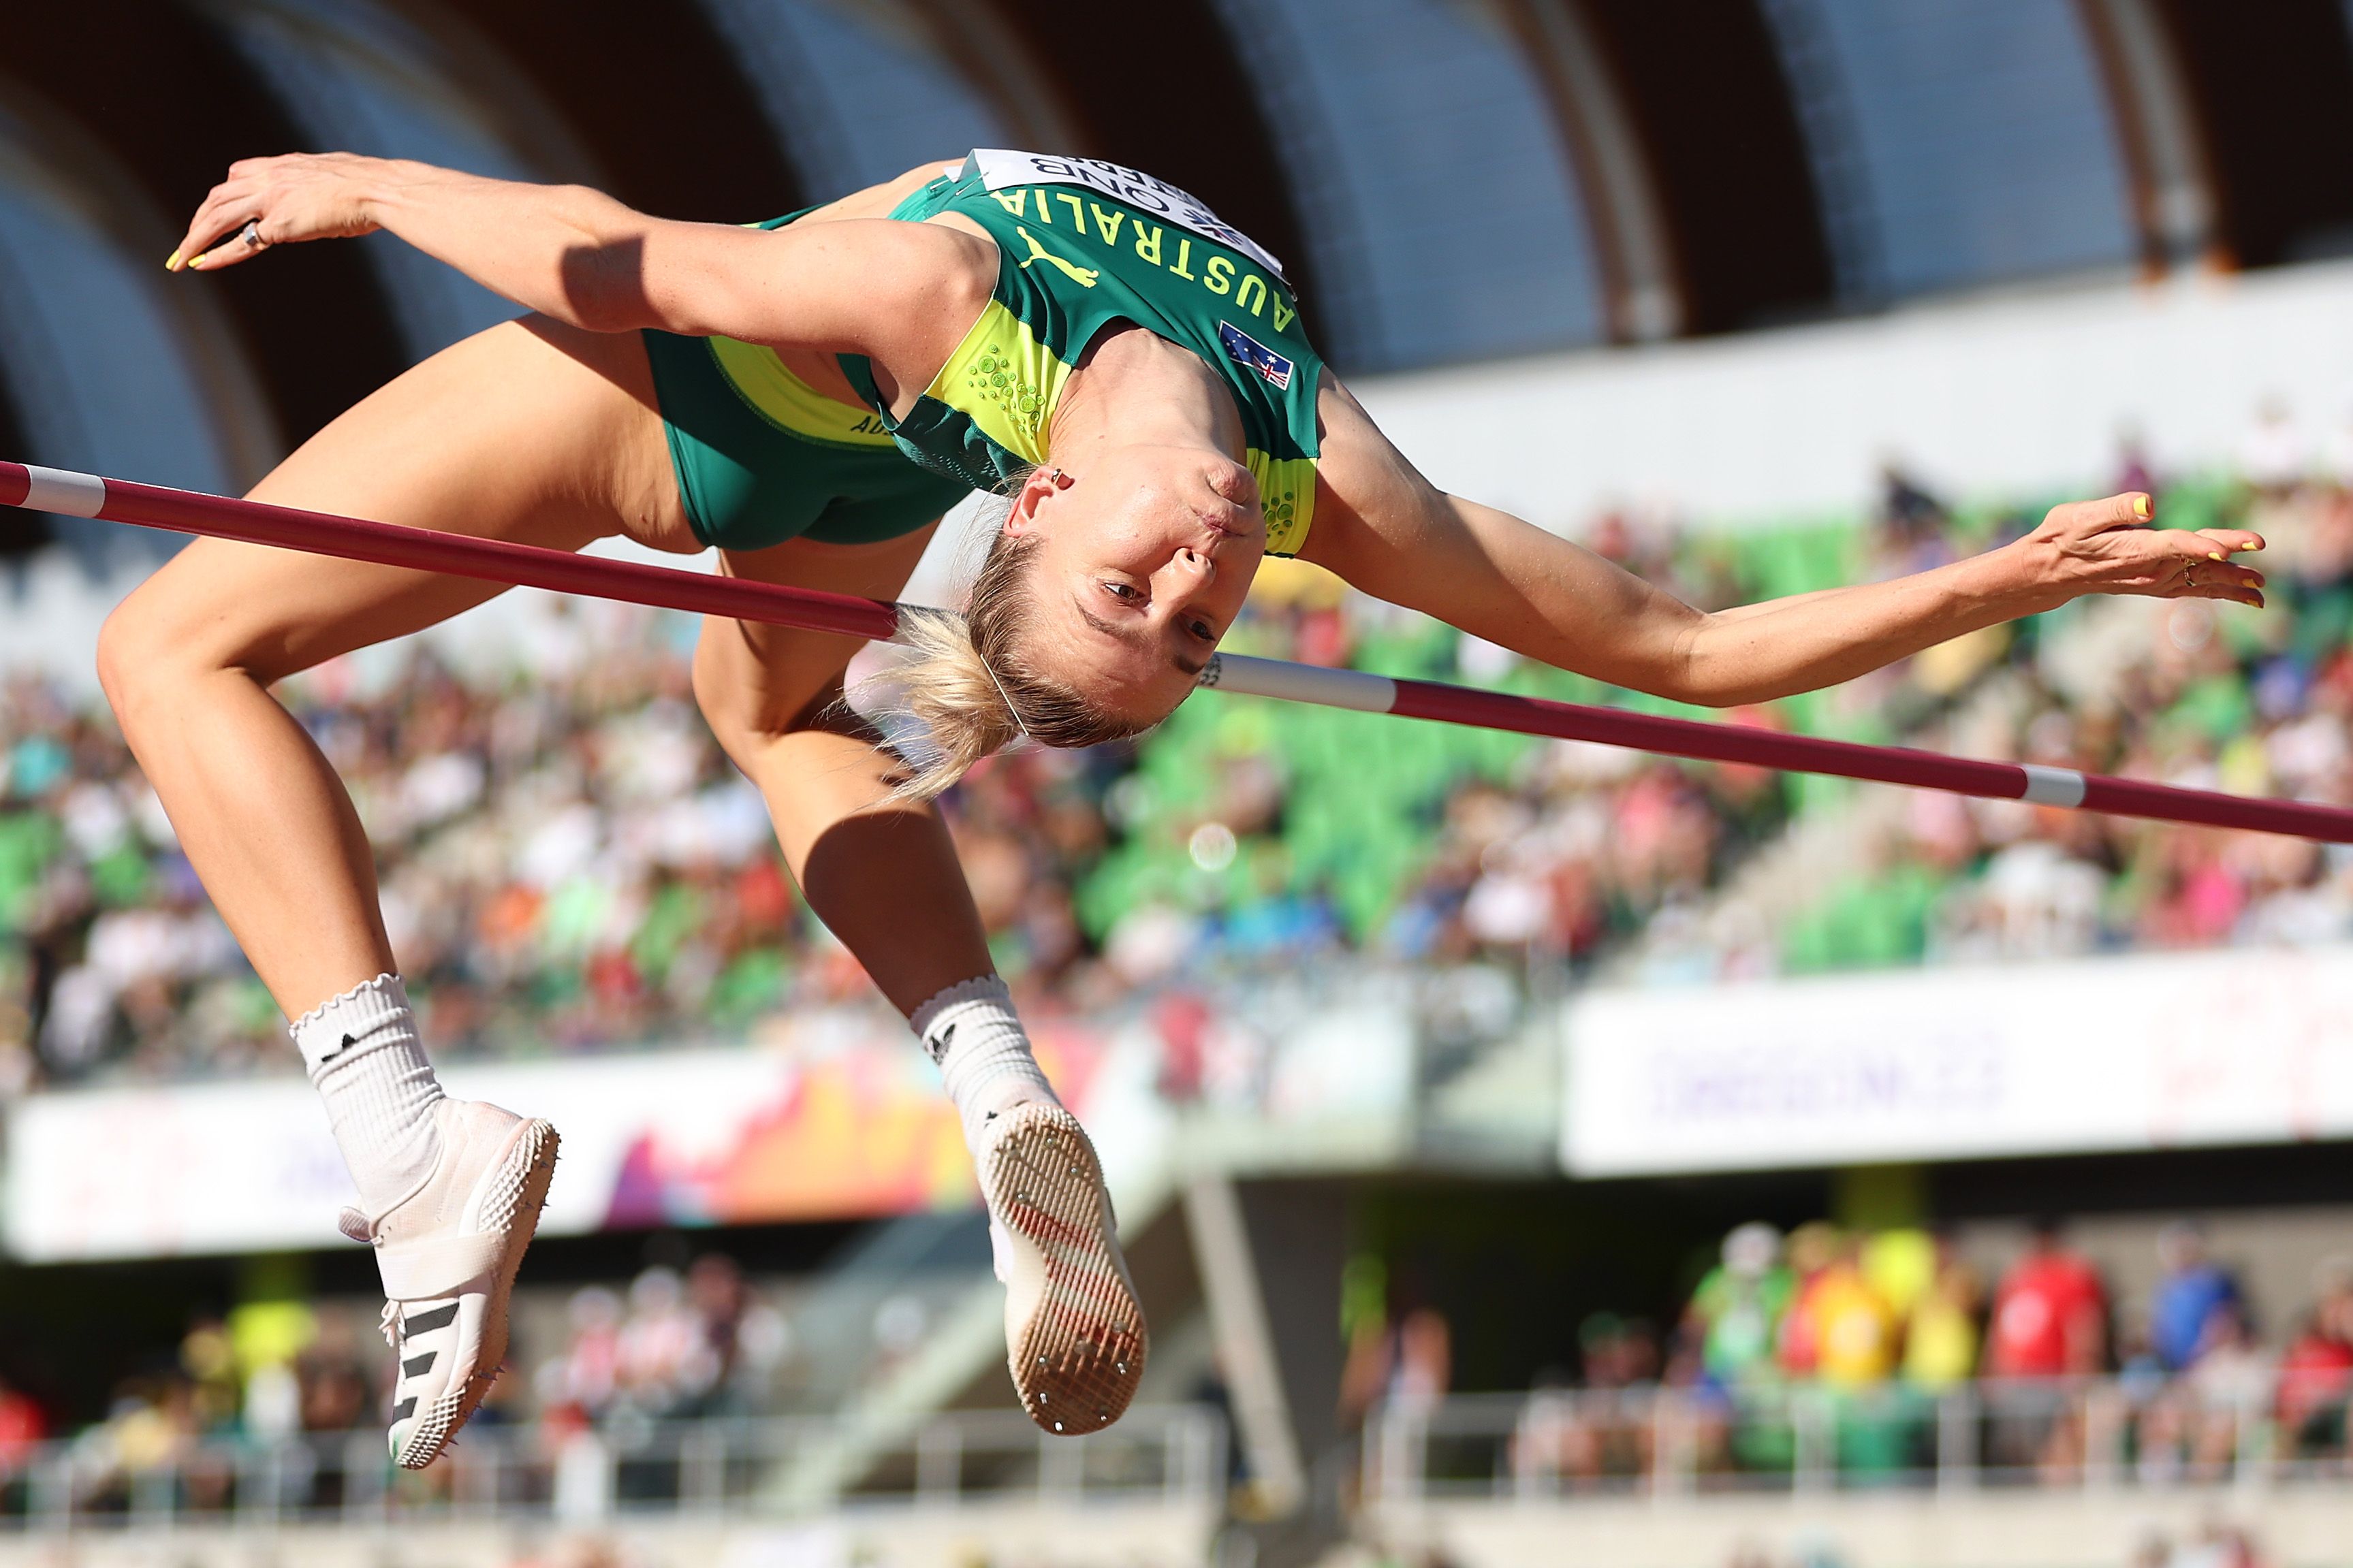 Ealeanor Patterson in the high jump at the World Athletics Championships Oregon22